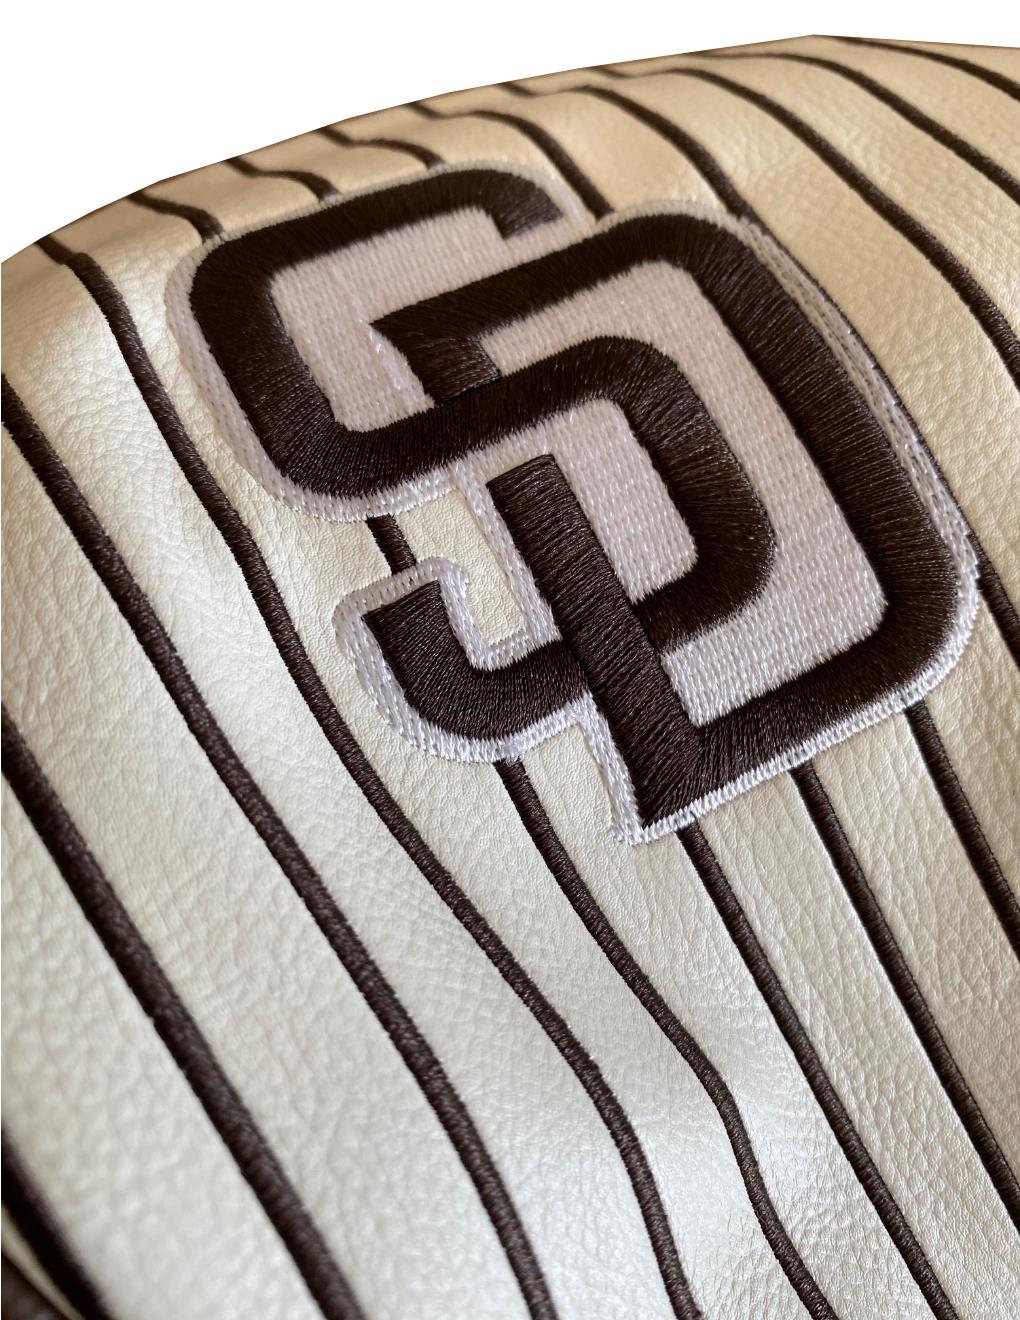 San Diego Padres Studio Pinstripe Blade Putter Cover